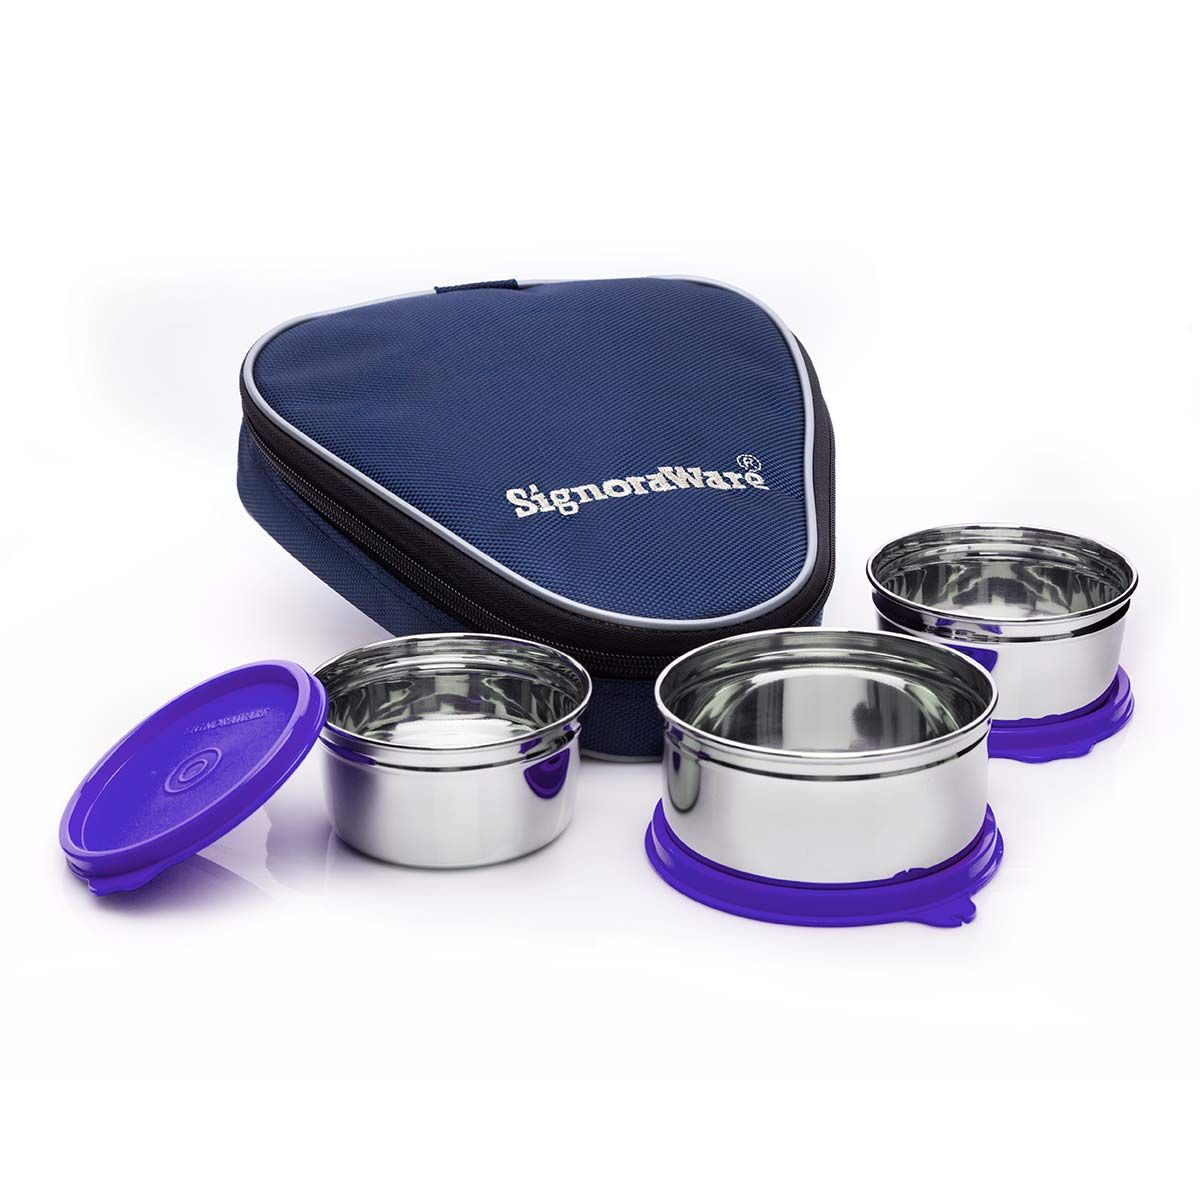 Signoraware Sleek Steel Stainless Steel Lunch Box with Bag